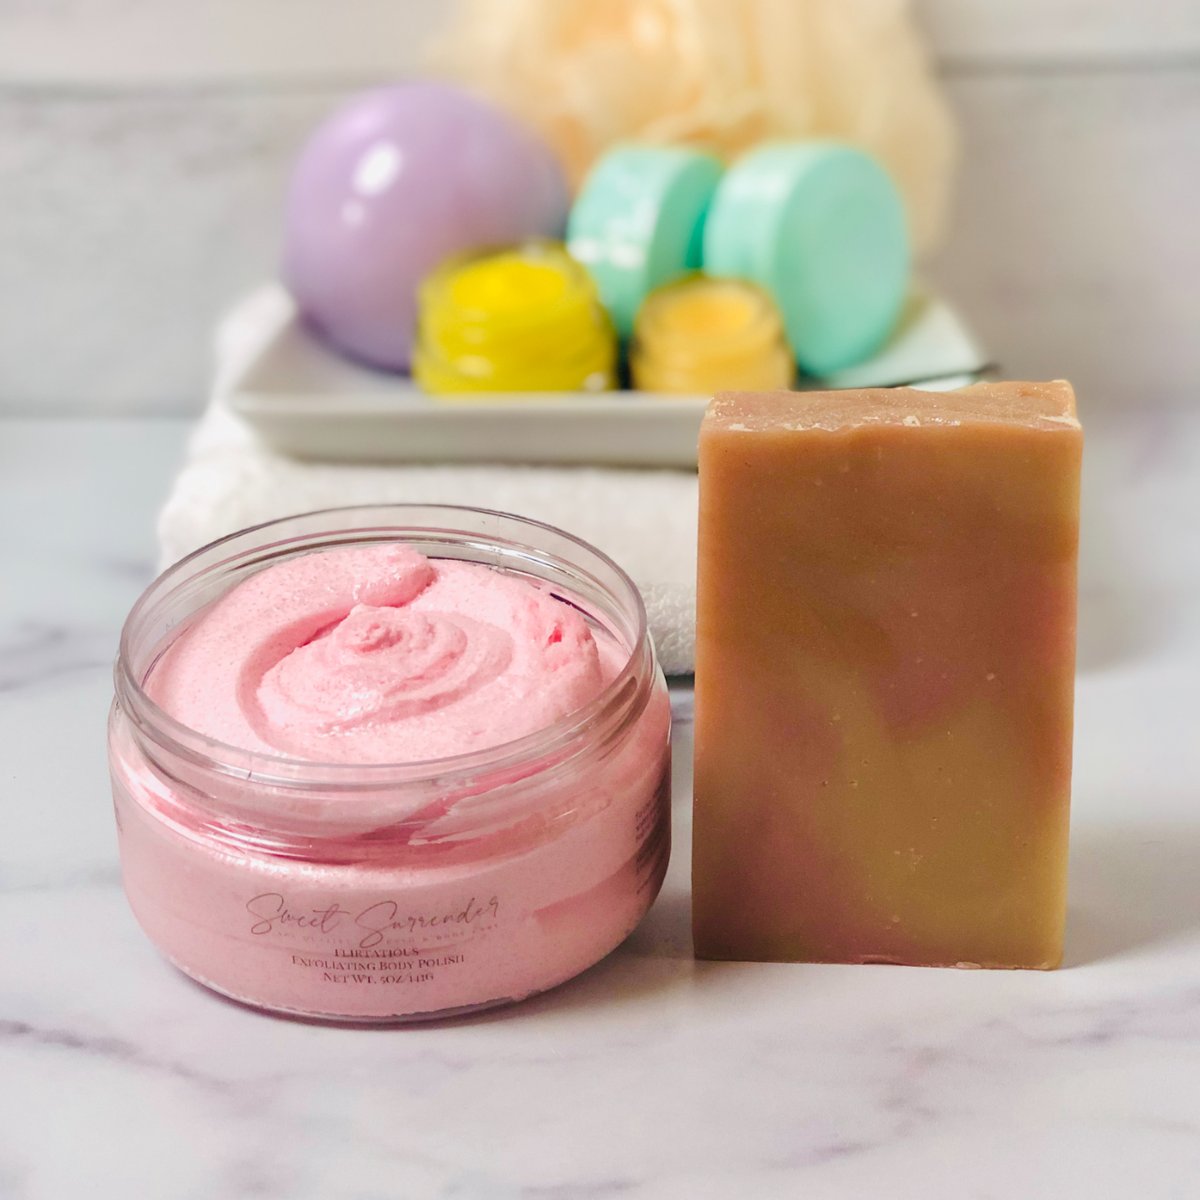 Pamper your dry sensitive skin with Sweet Surrender's artisanal soap, body butter, and bath bombs. Indulge in self-care that's as beautiful as you are!
#SelfCare #DrySkin #LuxurySkincare

sweet-surrender.biz/pages/why-swee…